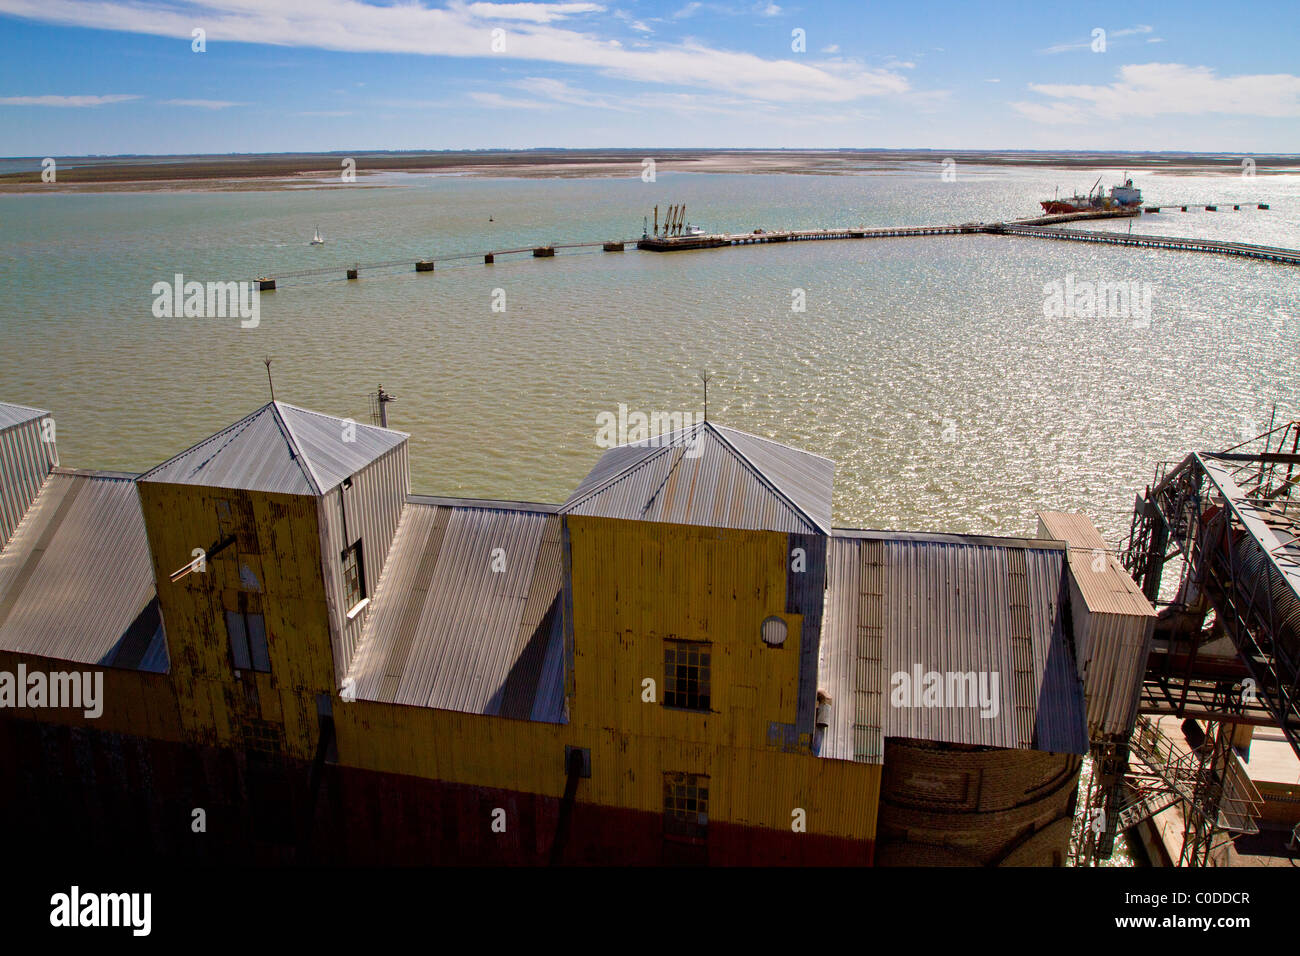 BAHIA BLANCA, ARGENTINA, 2010: Port of Ingeniero White - now is a major trading port of Argentina, deepest port in the country. Stock Photo